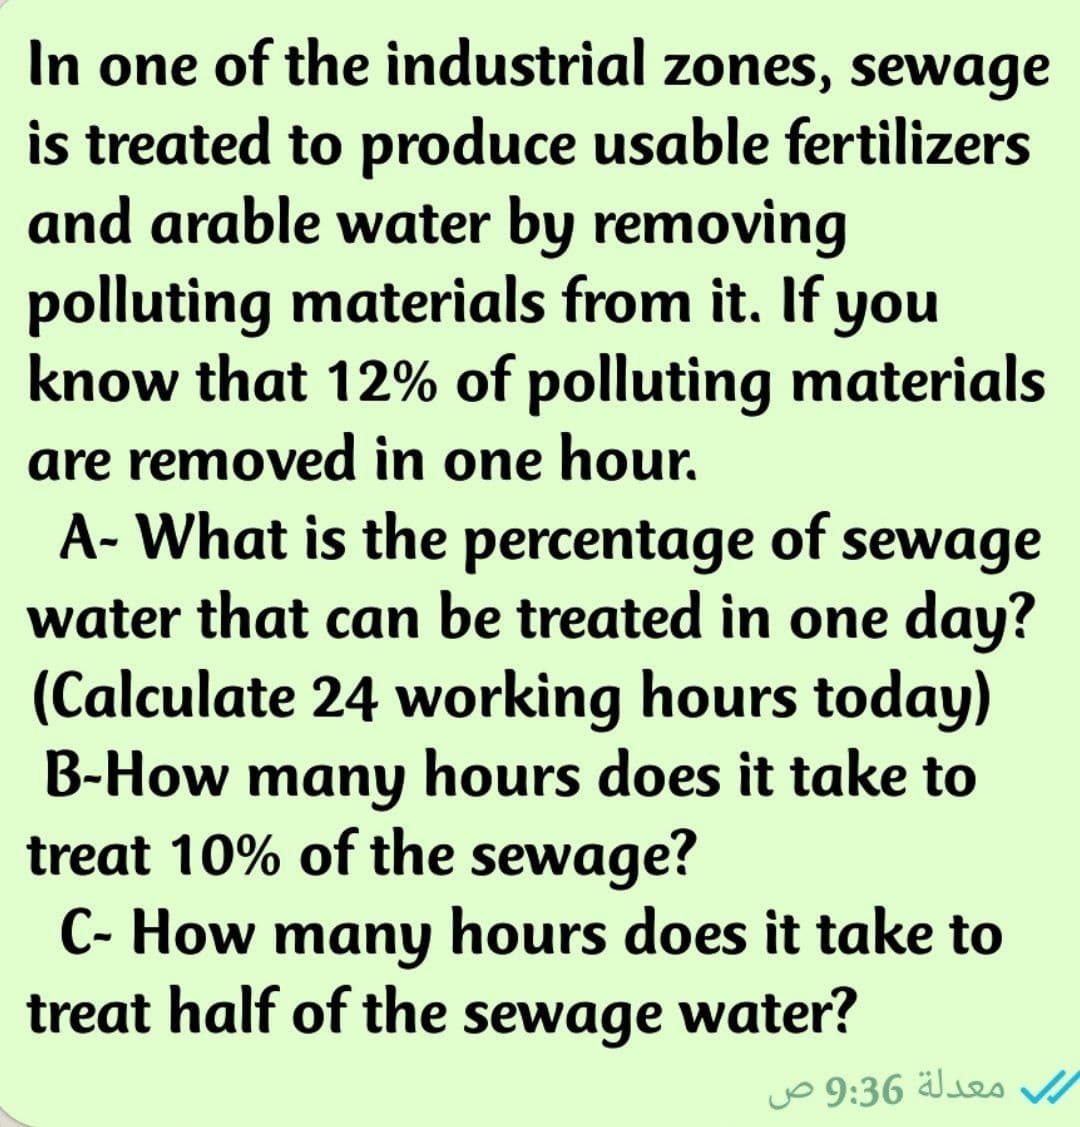 In one of the industrial zones, sewage
is treated to produce usable fertilizers
and arable water by removing
polluting materials from it. If you
know that 12% of polluting materials
are removed in one hour.
A- What is the percentage of sewage
water that can be treated in one day?
(Calculate 24 working hours today)
B-How many hours does it take to
treat 10% of the sewage?
C- How many hours does it take to
treat half of the sewage water?
jo 9:36
